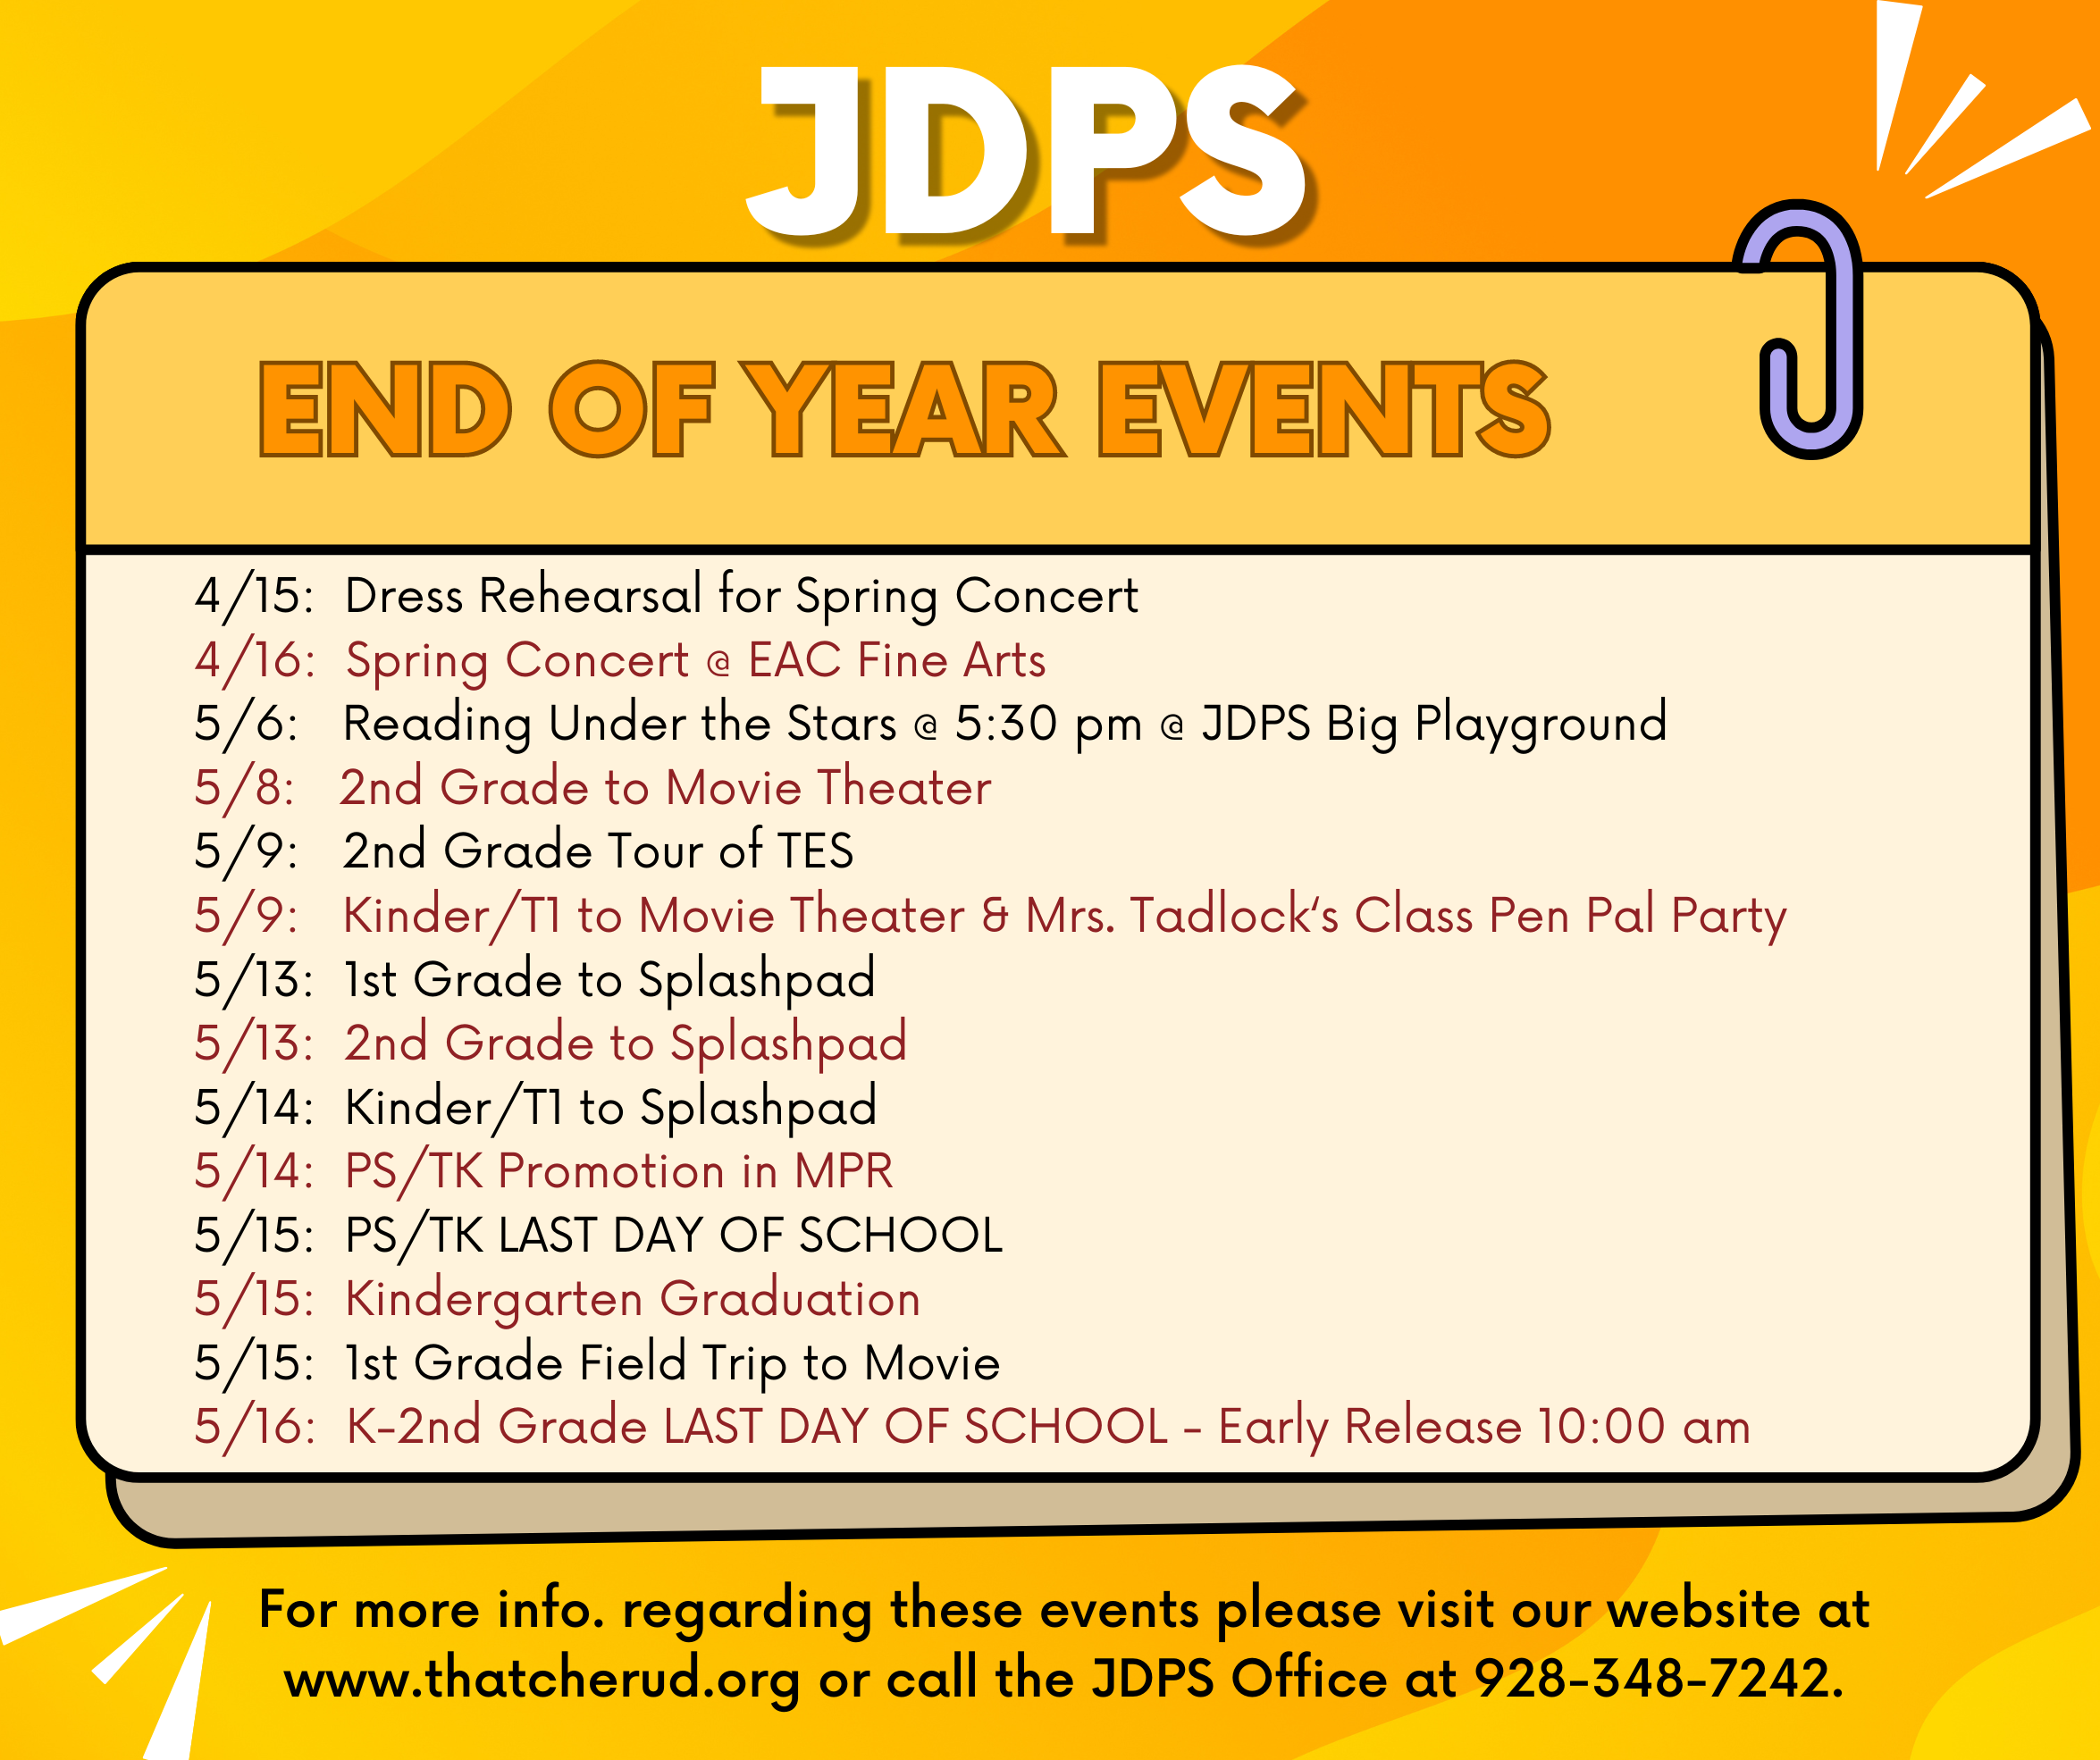 JDPS End of Year Events